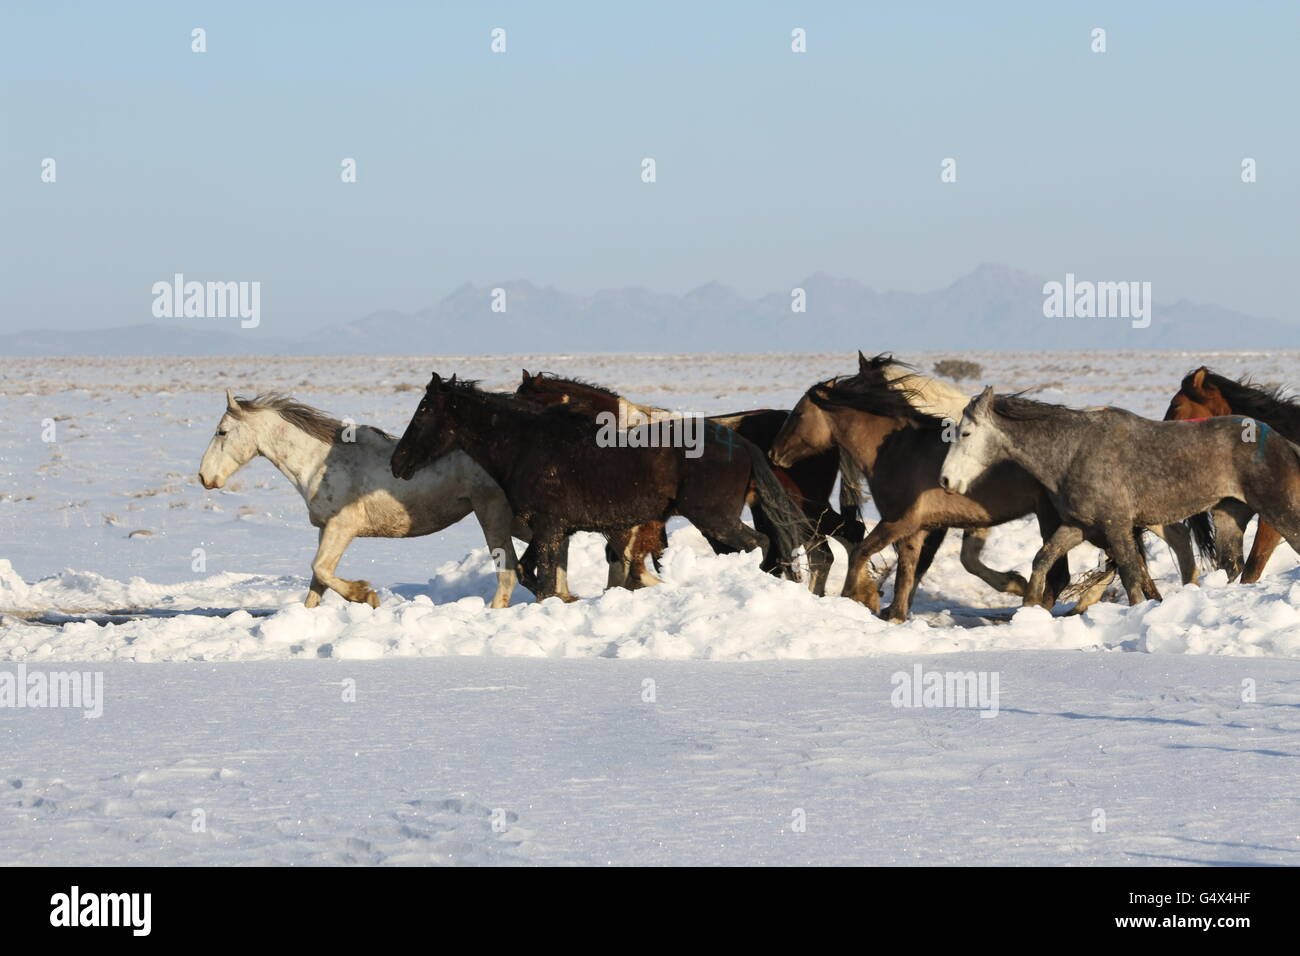 Wild horses in the snow in the Swasey Herd Management Area February 27, 2012 near Delta, Utah. Stock Photo